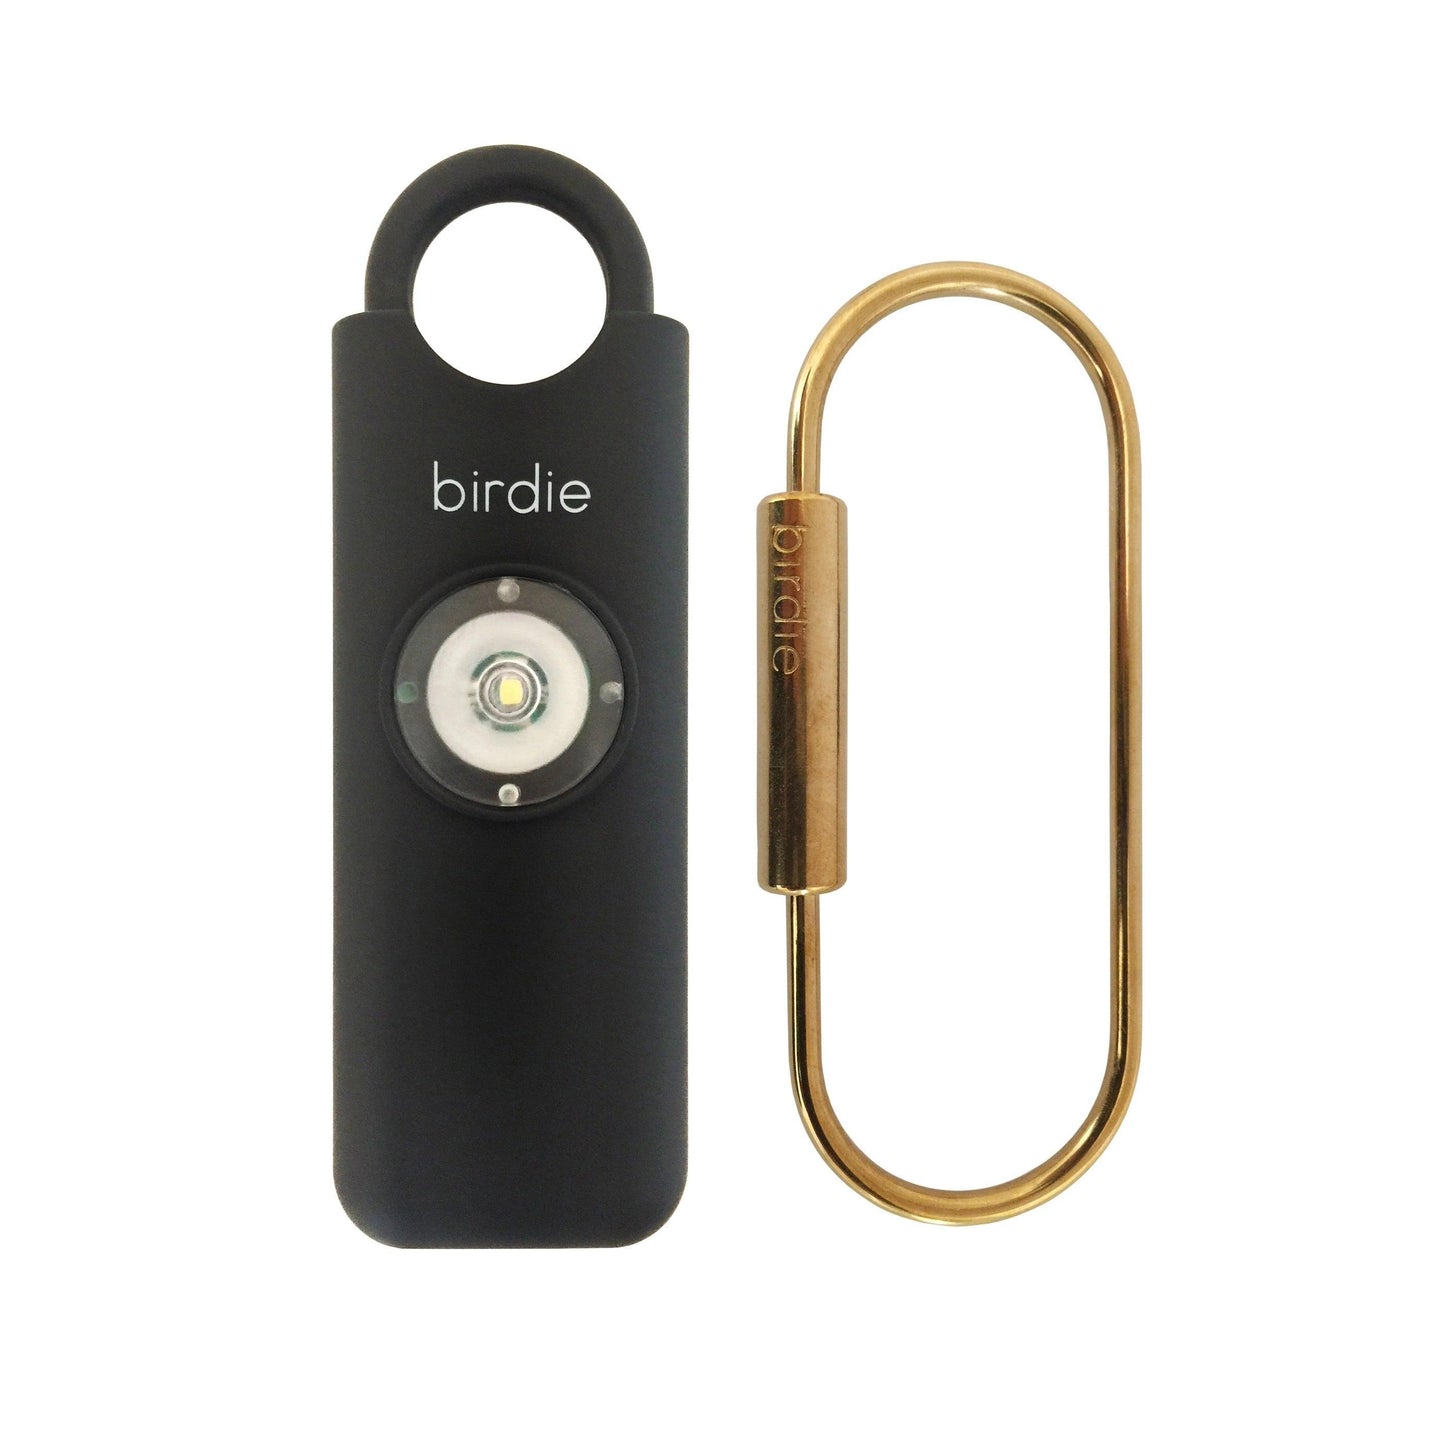 She's Birdie Personal Safety Alarm (Various Colors) - Haven